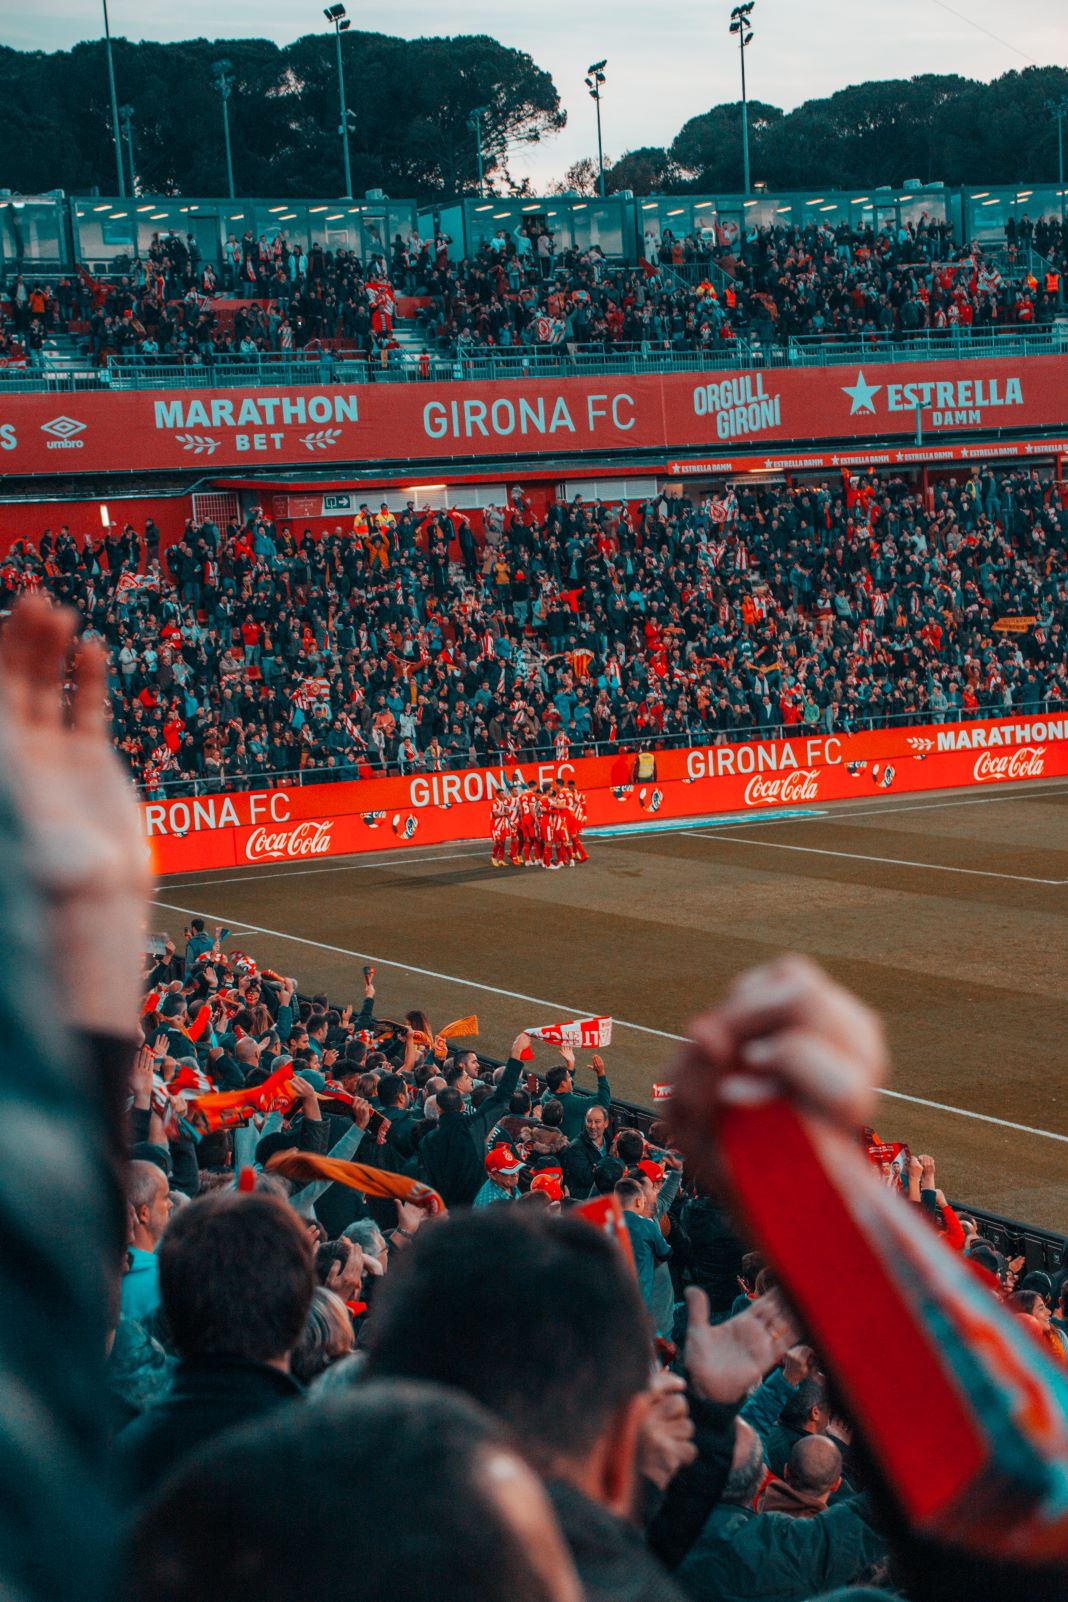 The connected stadium, a new marketing media for brands